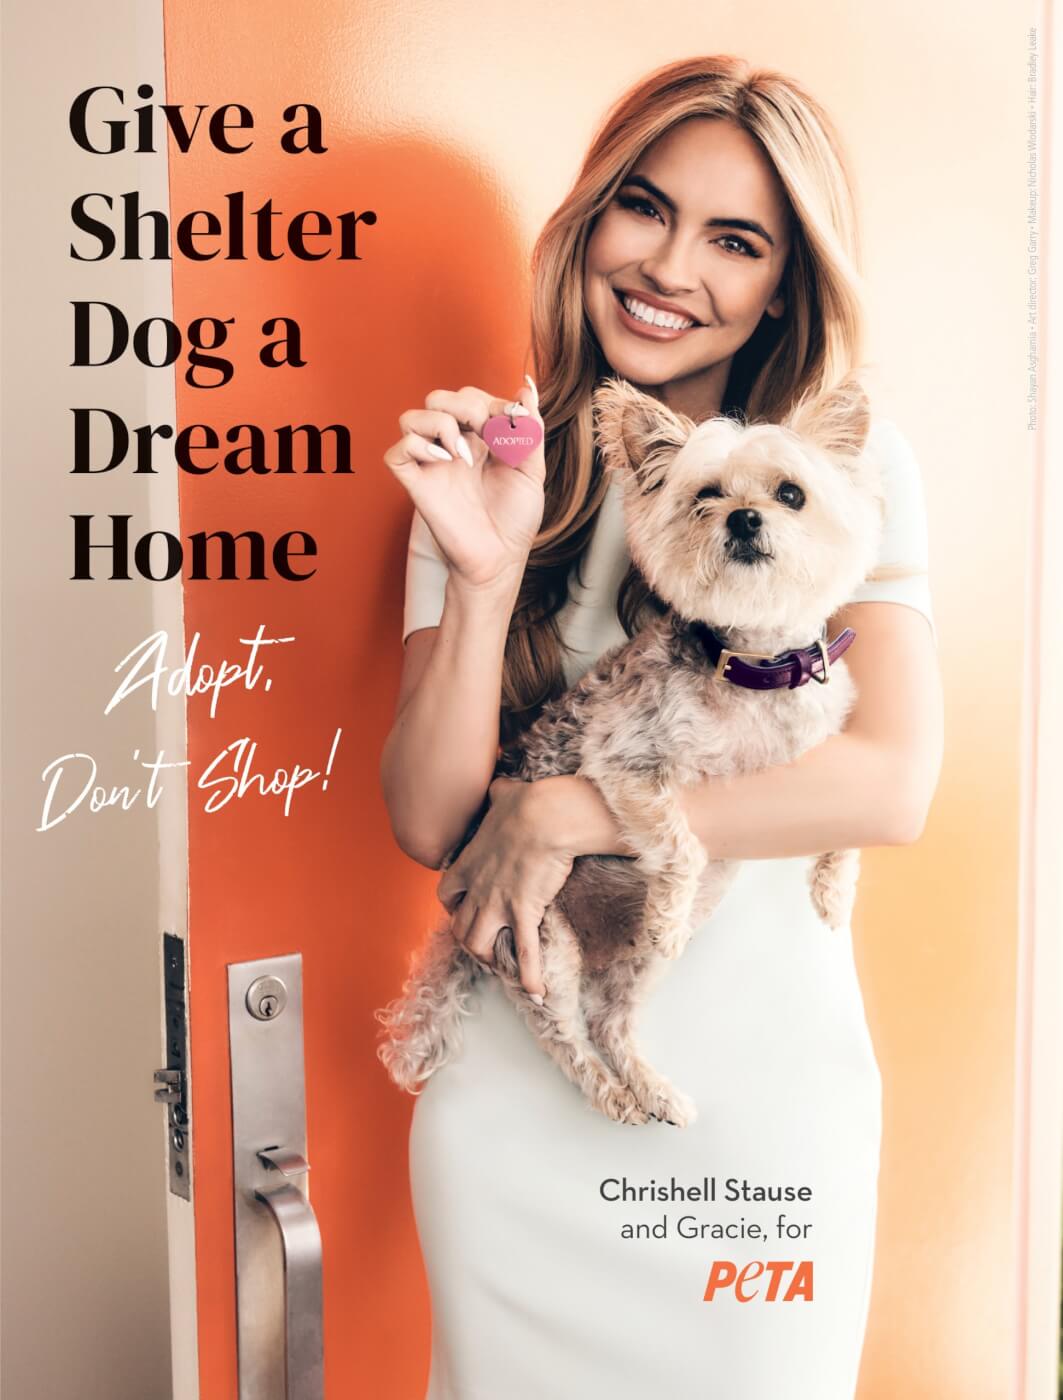 Give a shelter dog a dream home Chrishell Stause